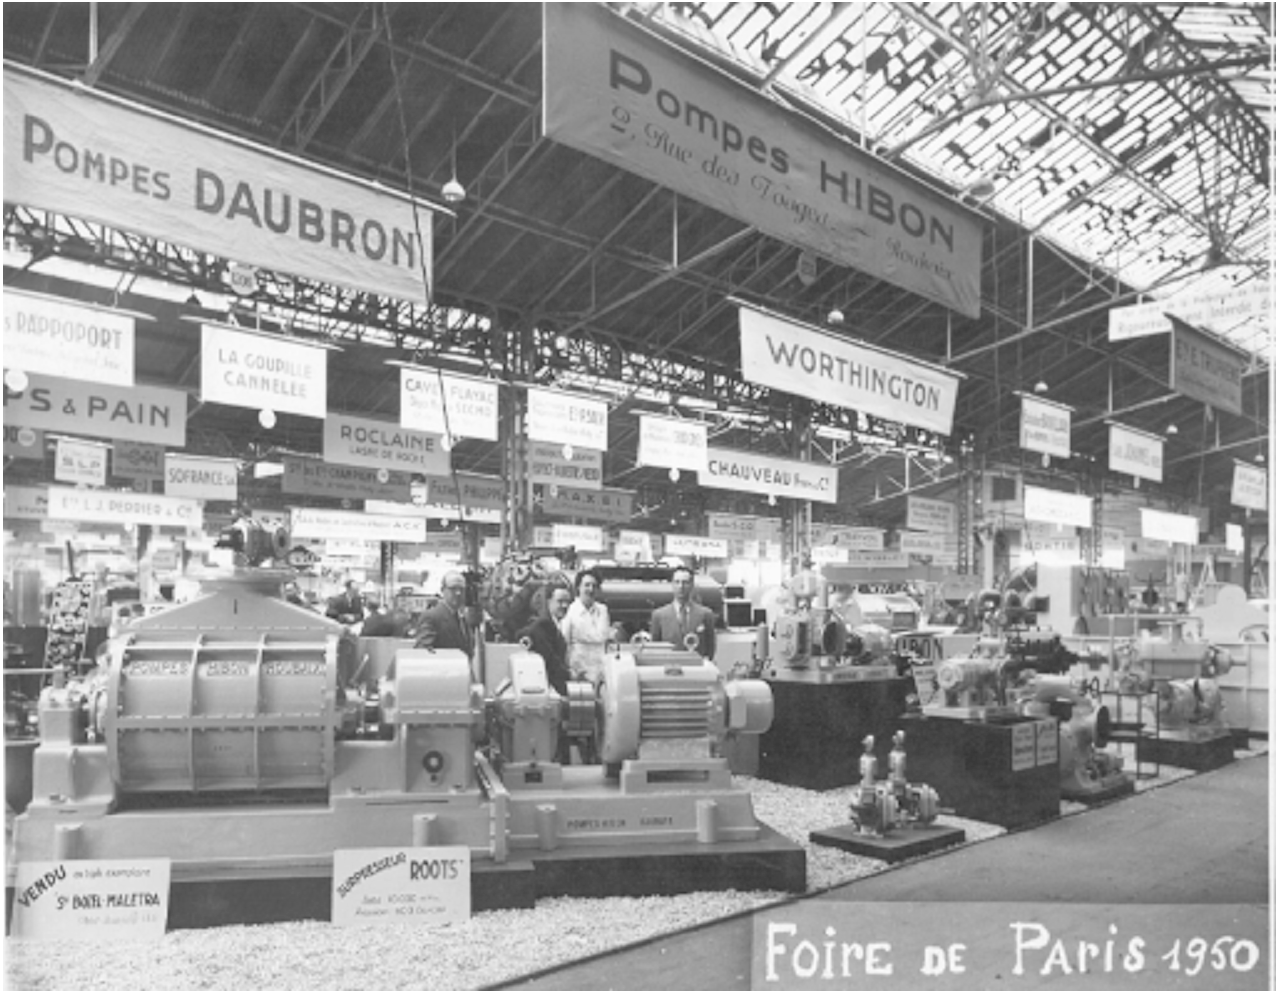 Participation in the Paris fair in 1950 presentation of positive displacement blowers